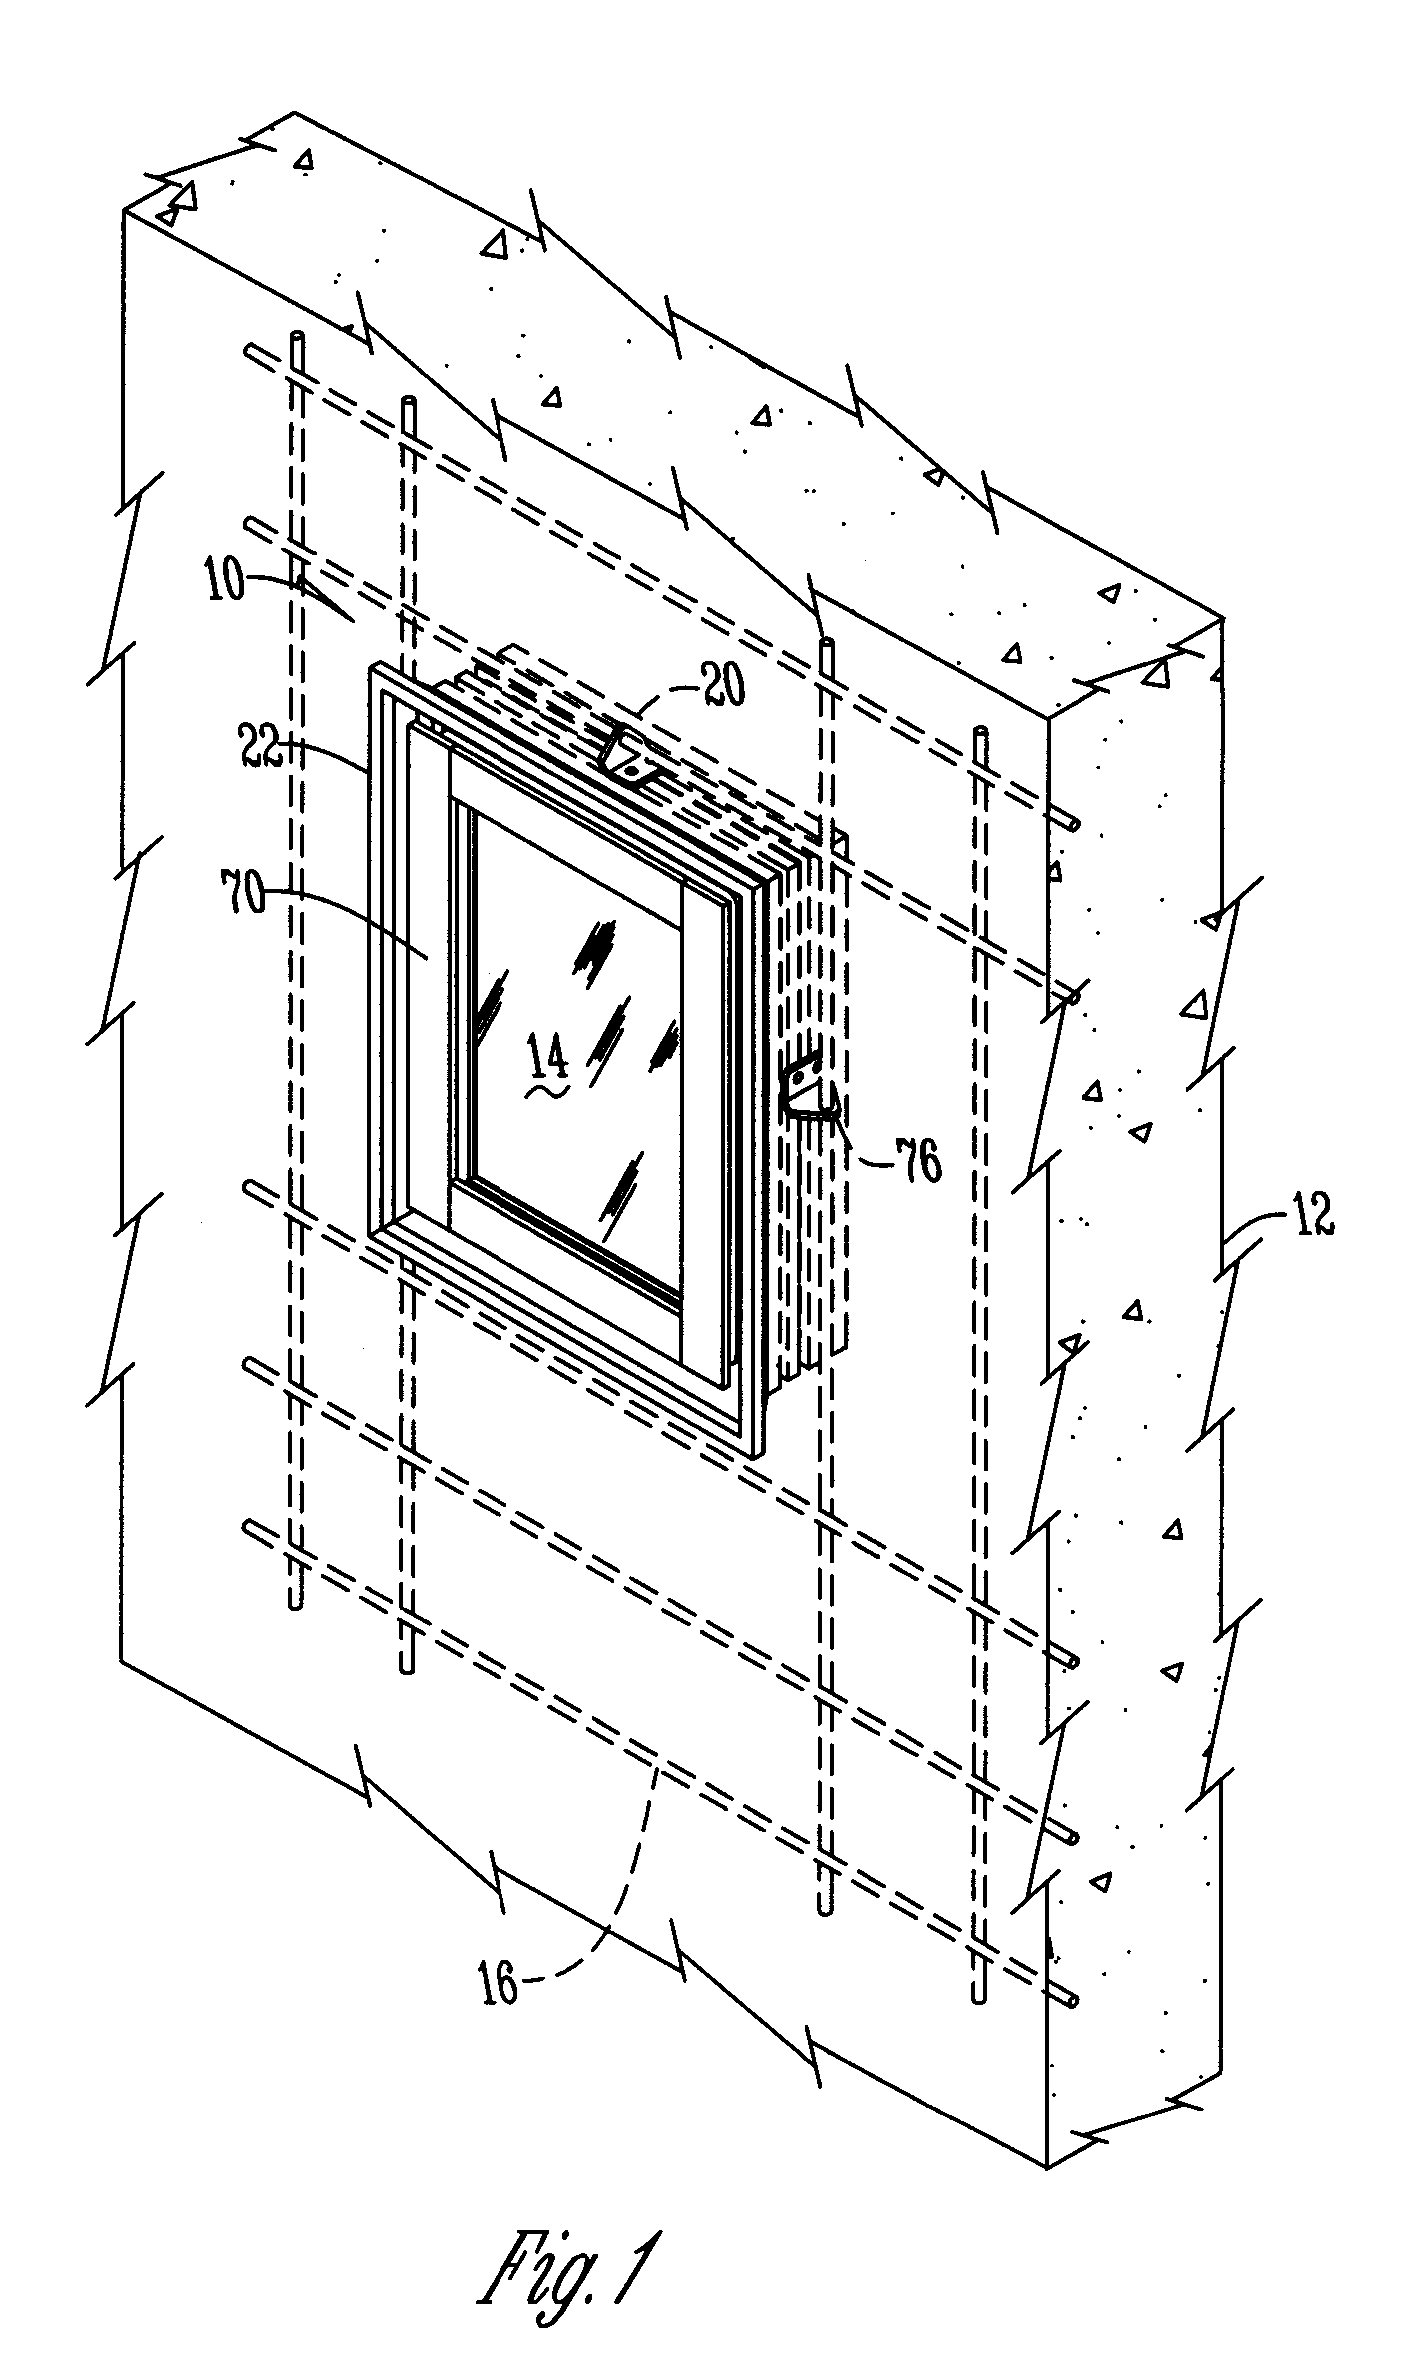 Method of installing windows into a concrete structure